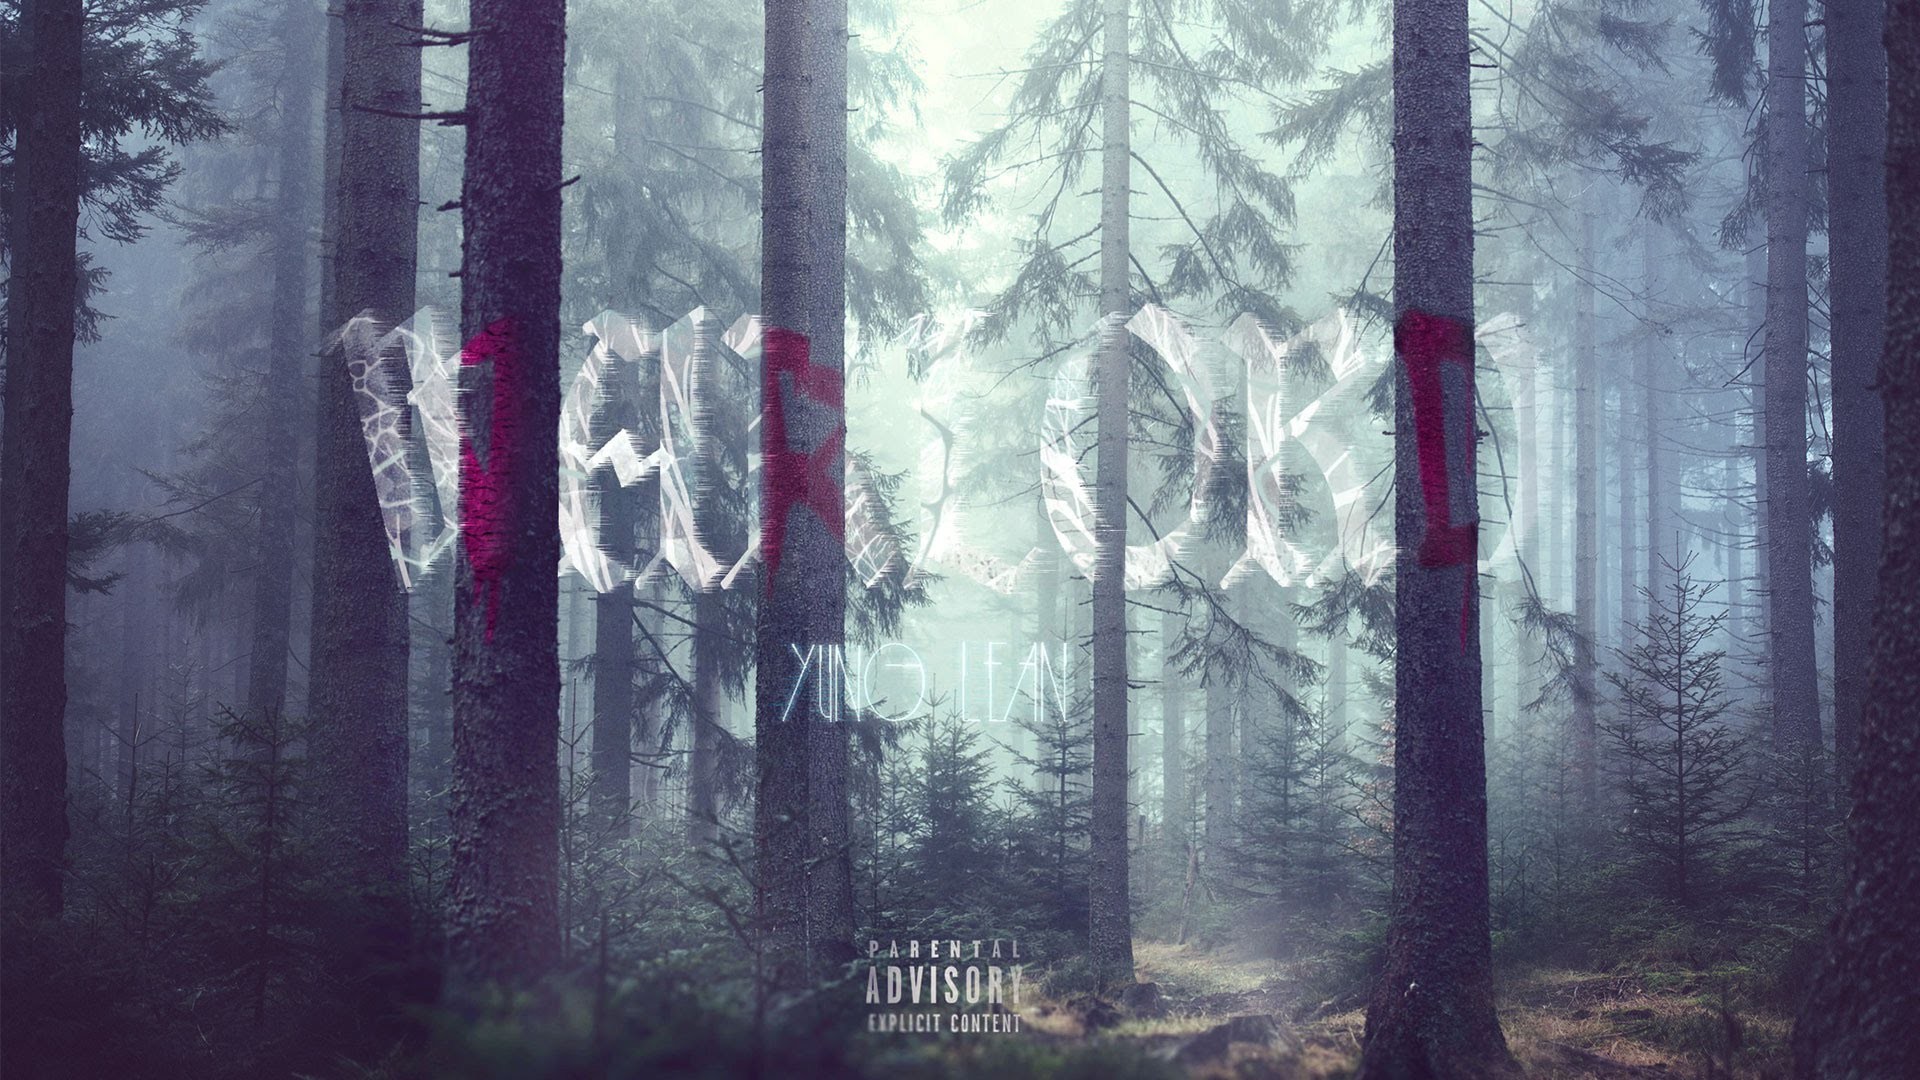 WARLORD Yung Lean – COVER